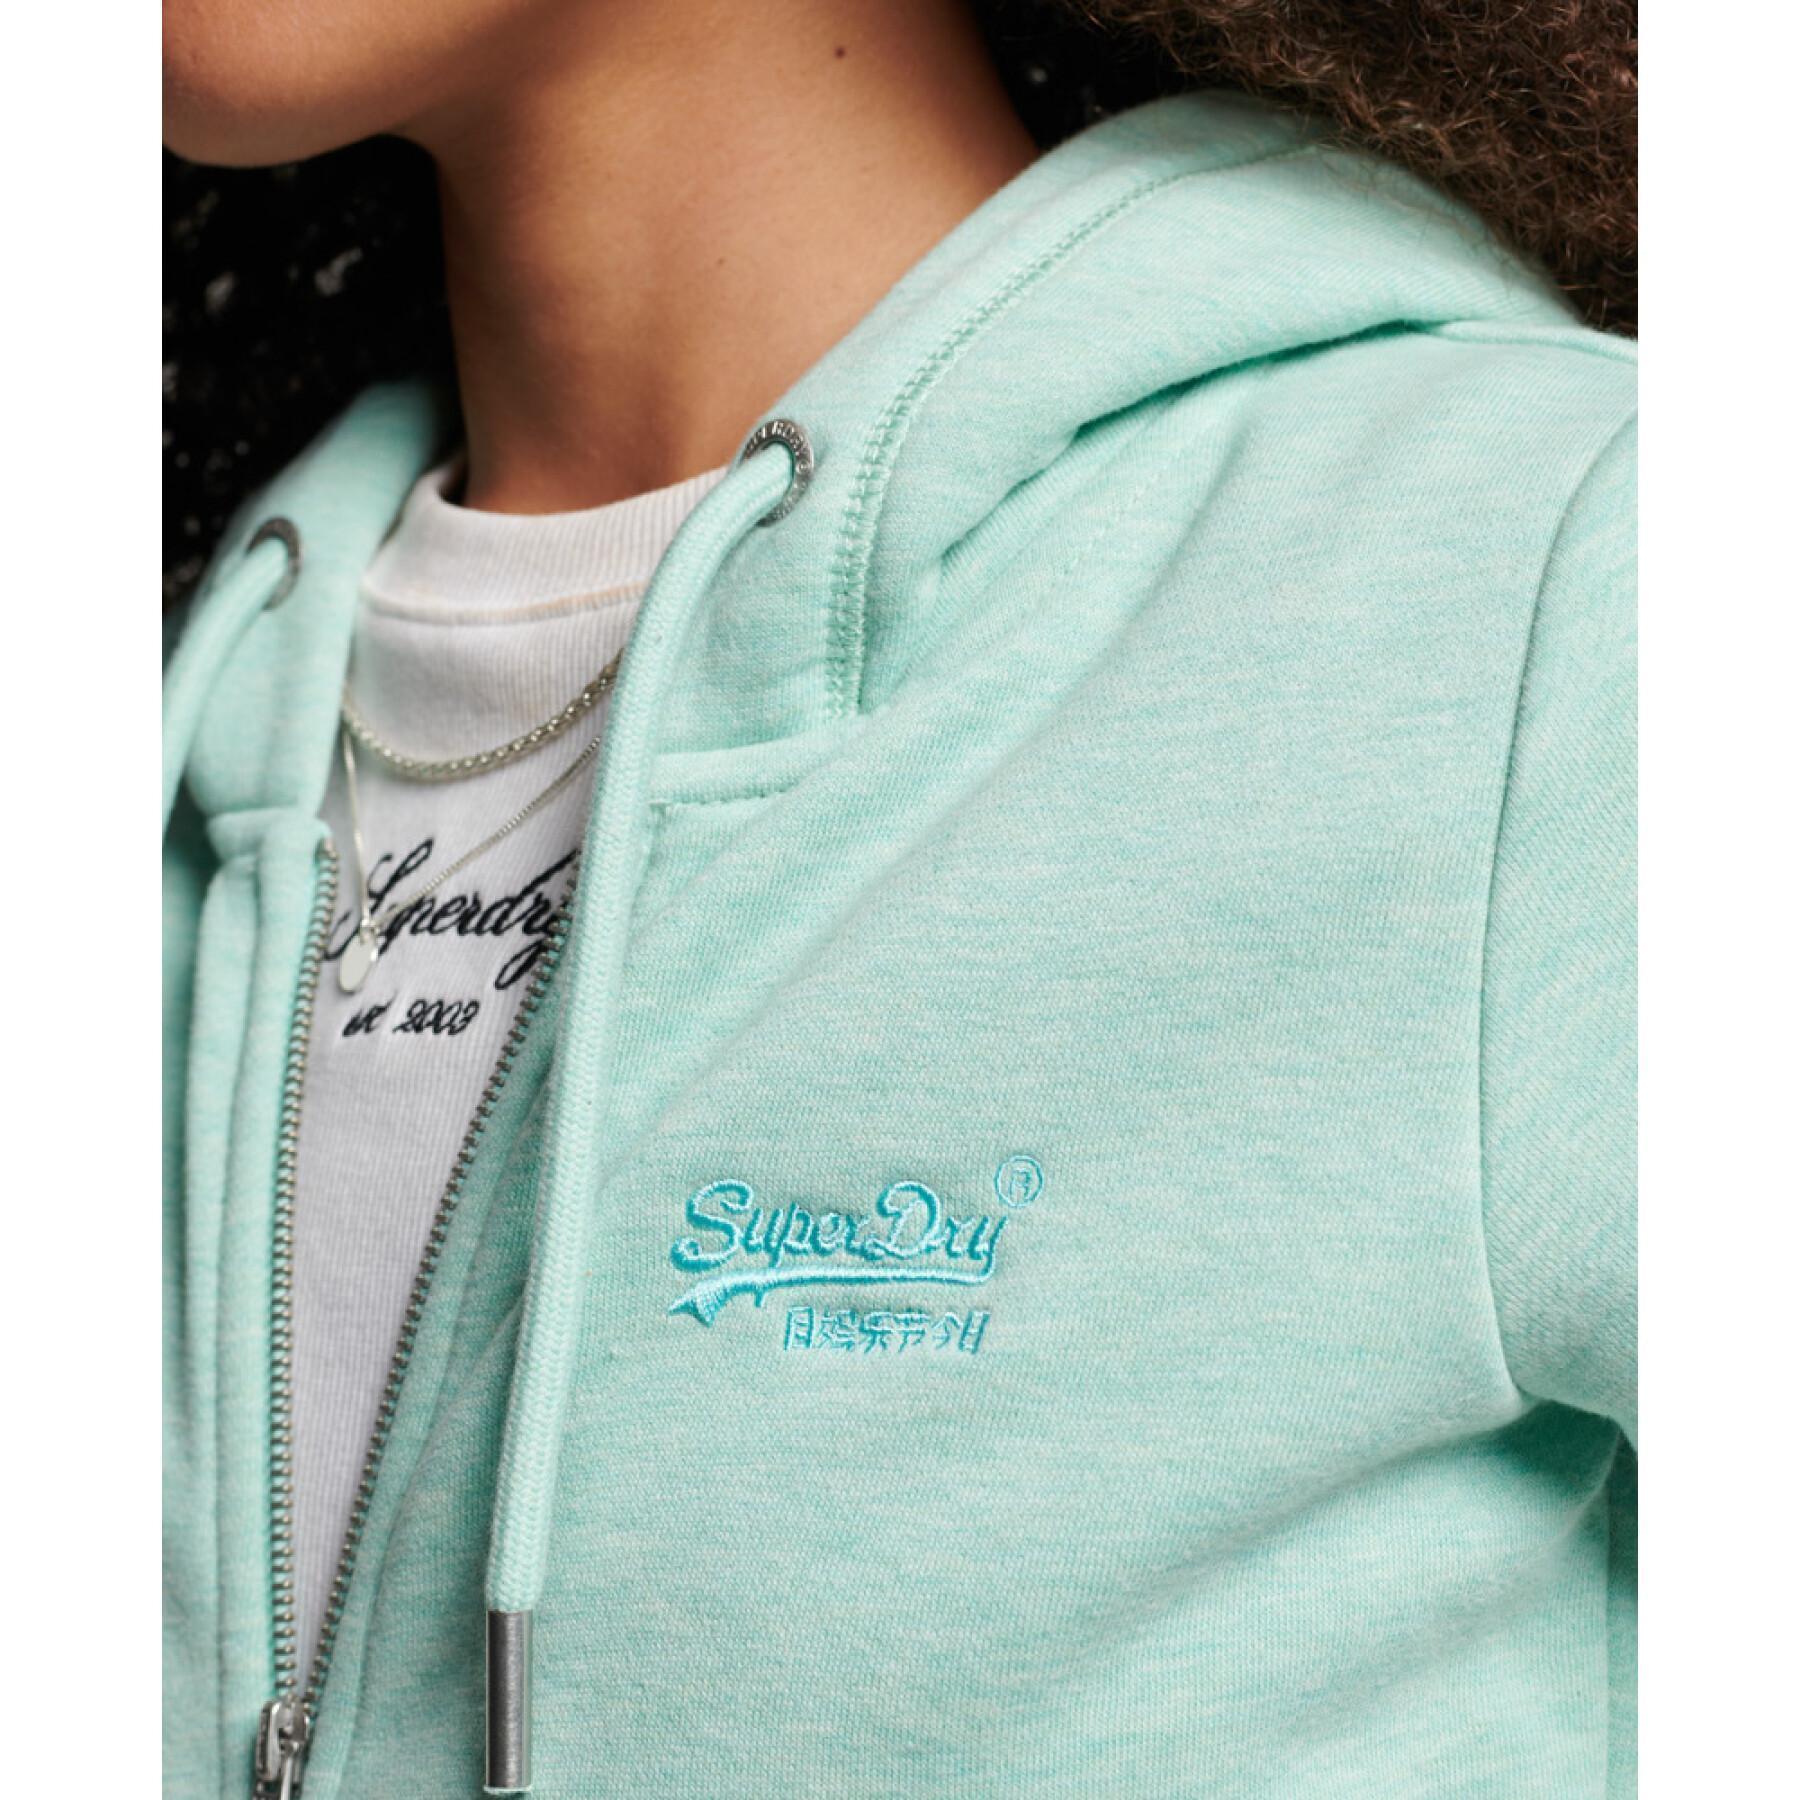 Sweatshirt hooded zipped and embroidered woman Superdry Vintage Logo